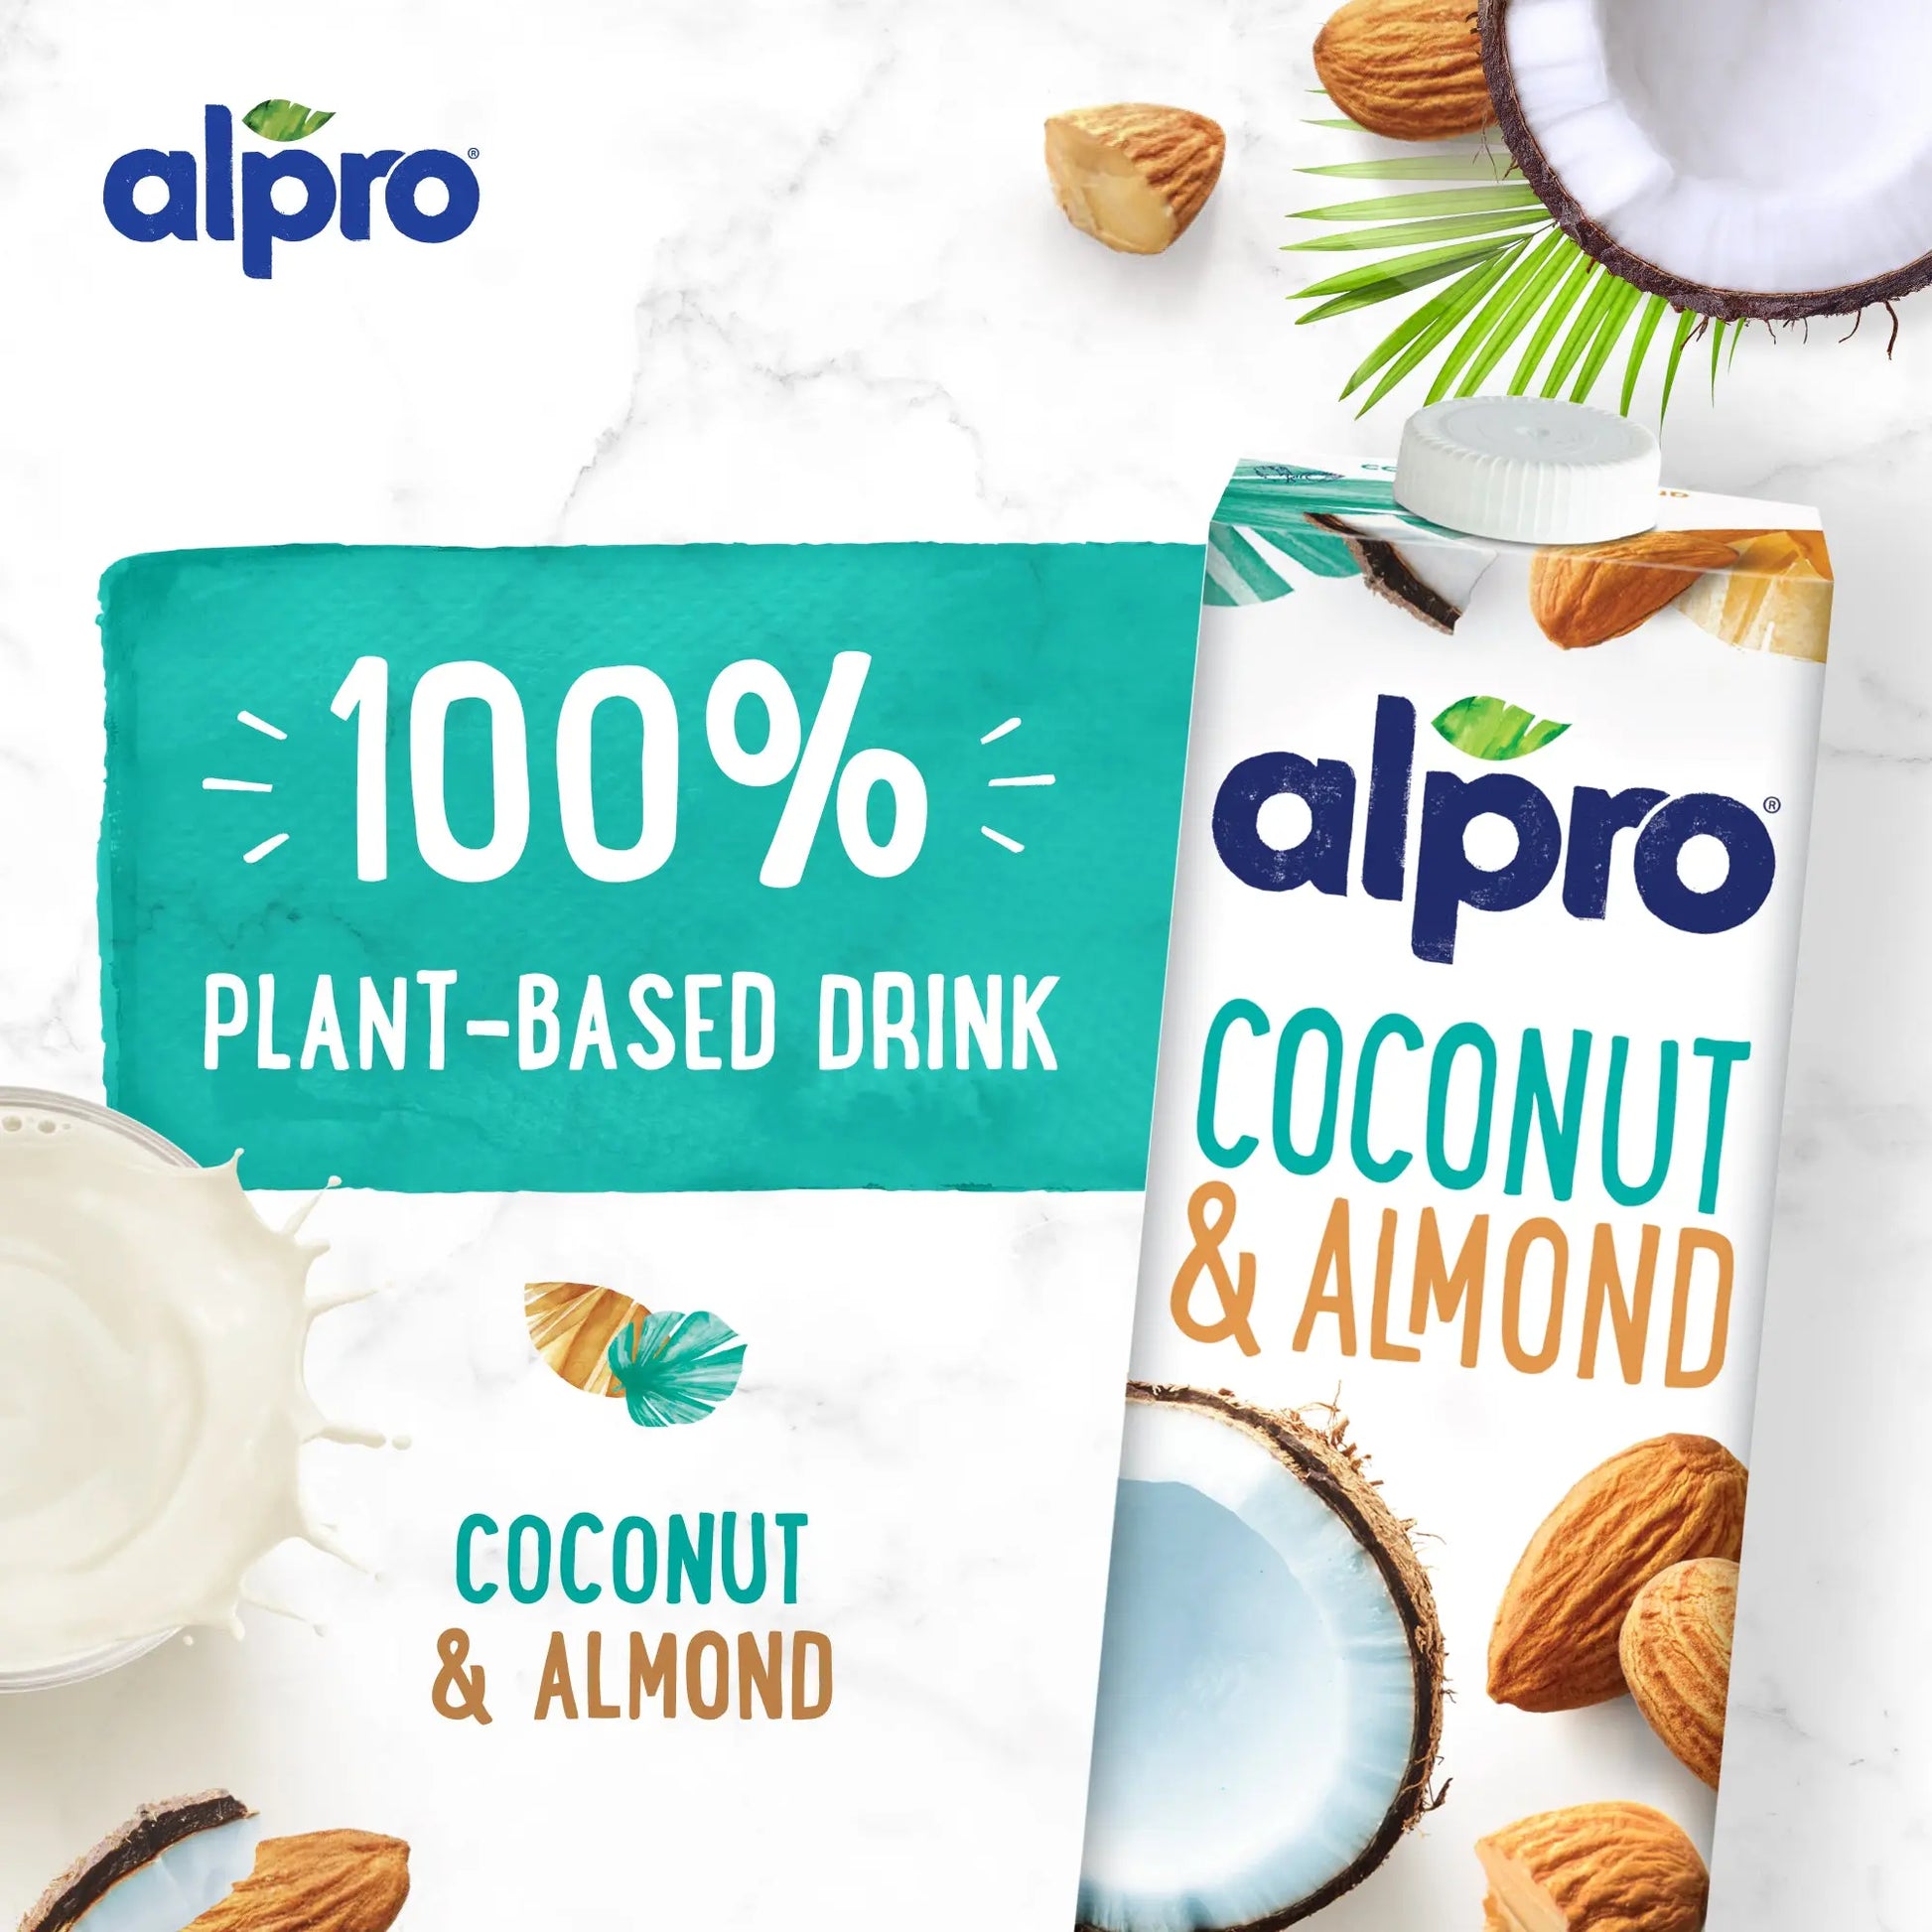 Alpro Coconut-Almond Drink 1L, 100% Plant Based And Gluten & Dairy Free, Suitable For Vegans, Naturally Free From Lactose, Rich In Nutrients Alpro